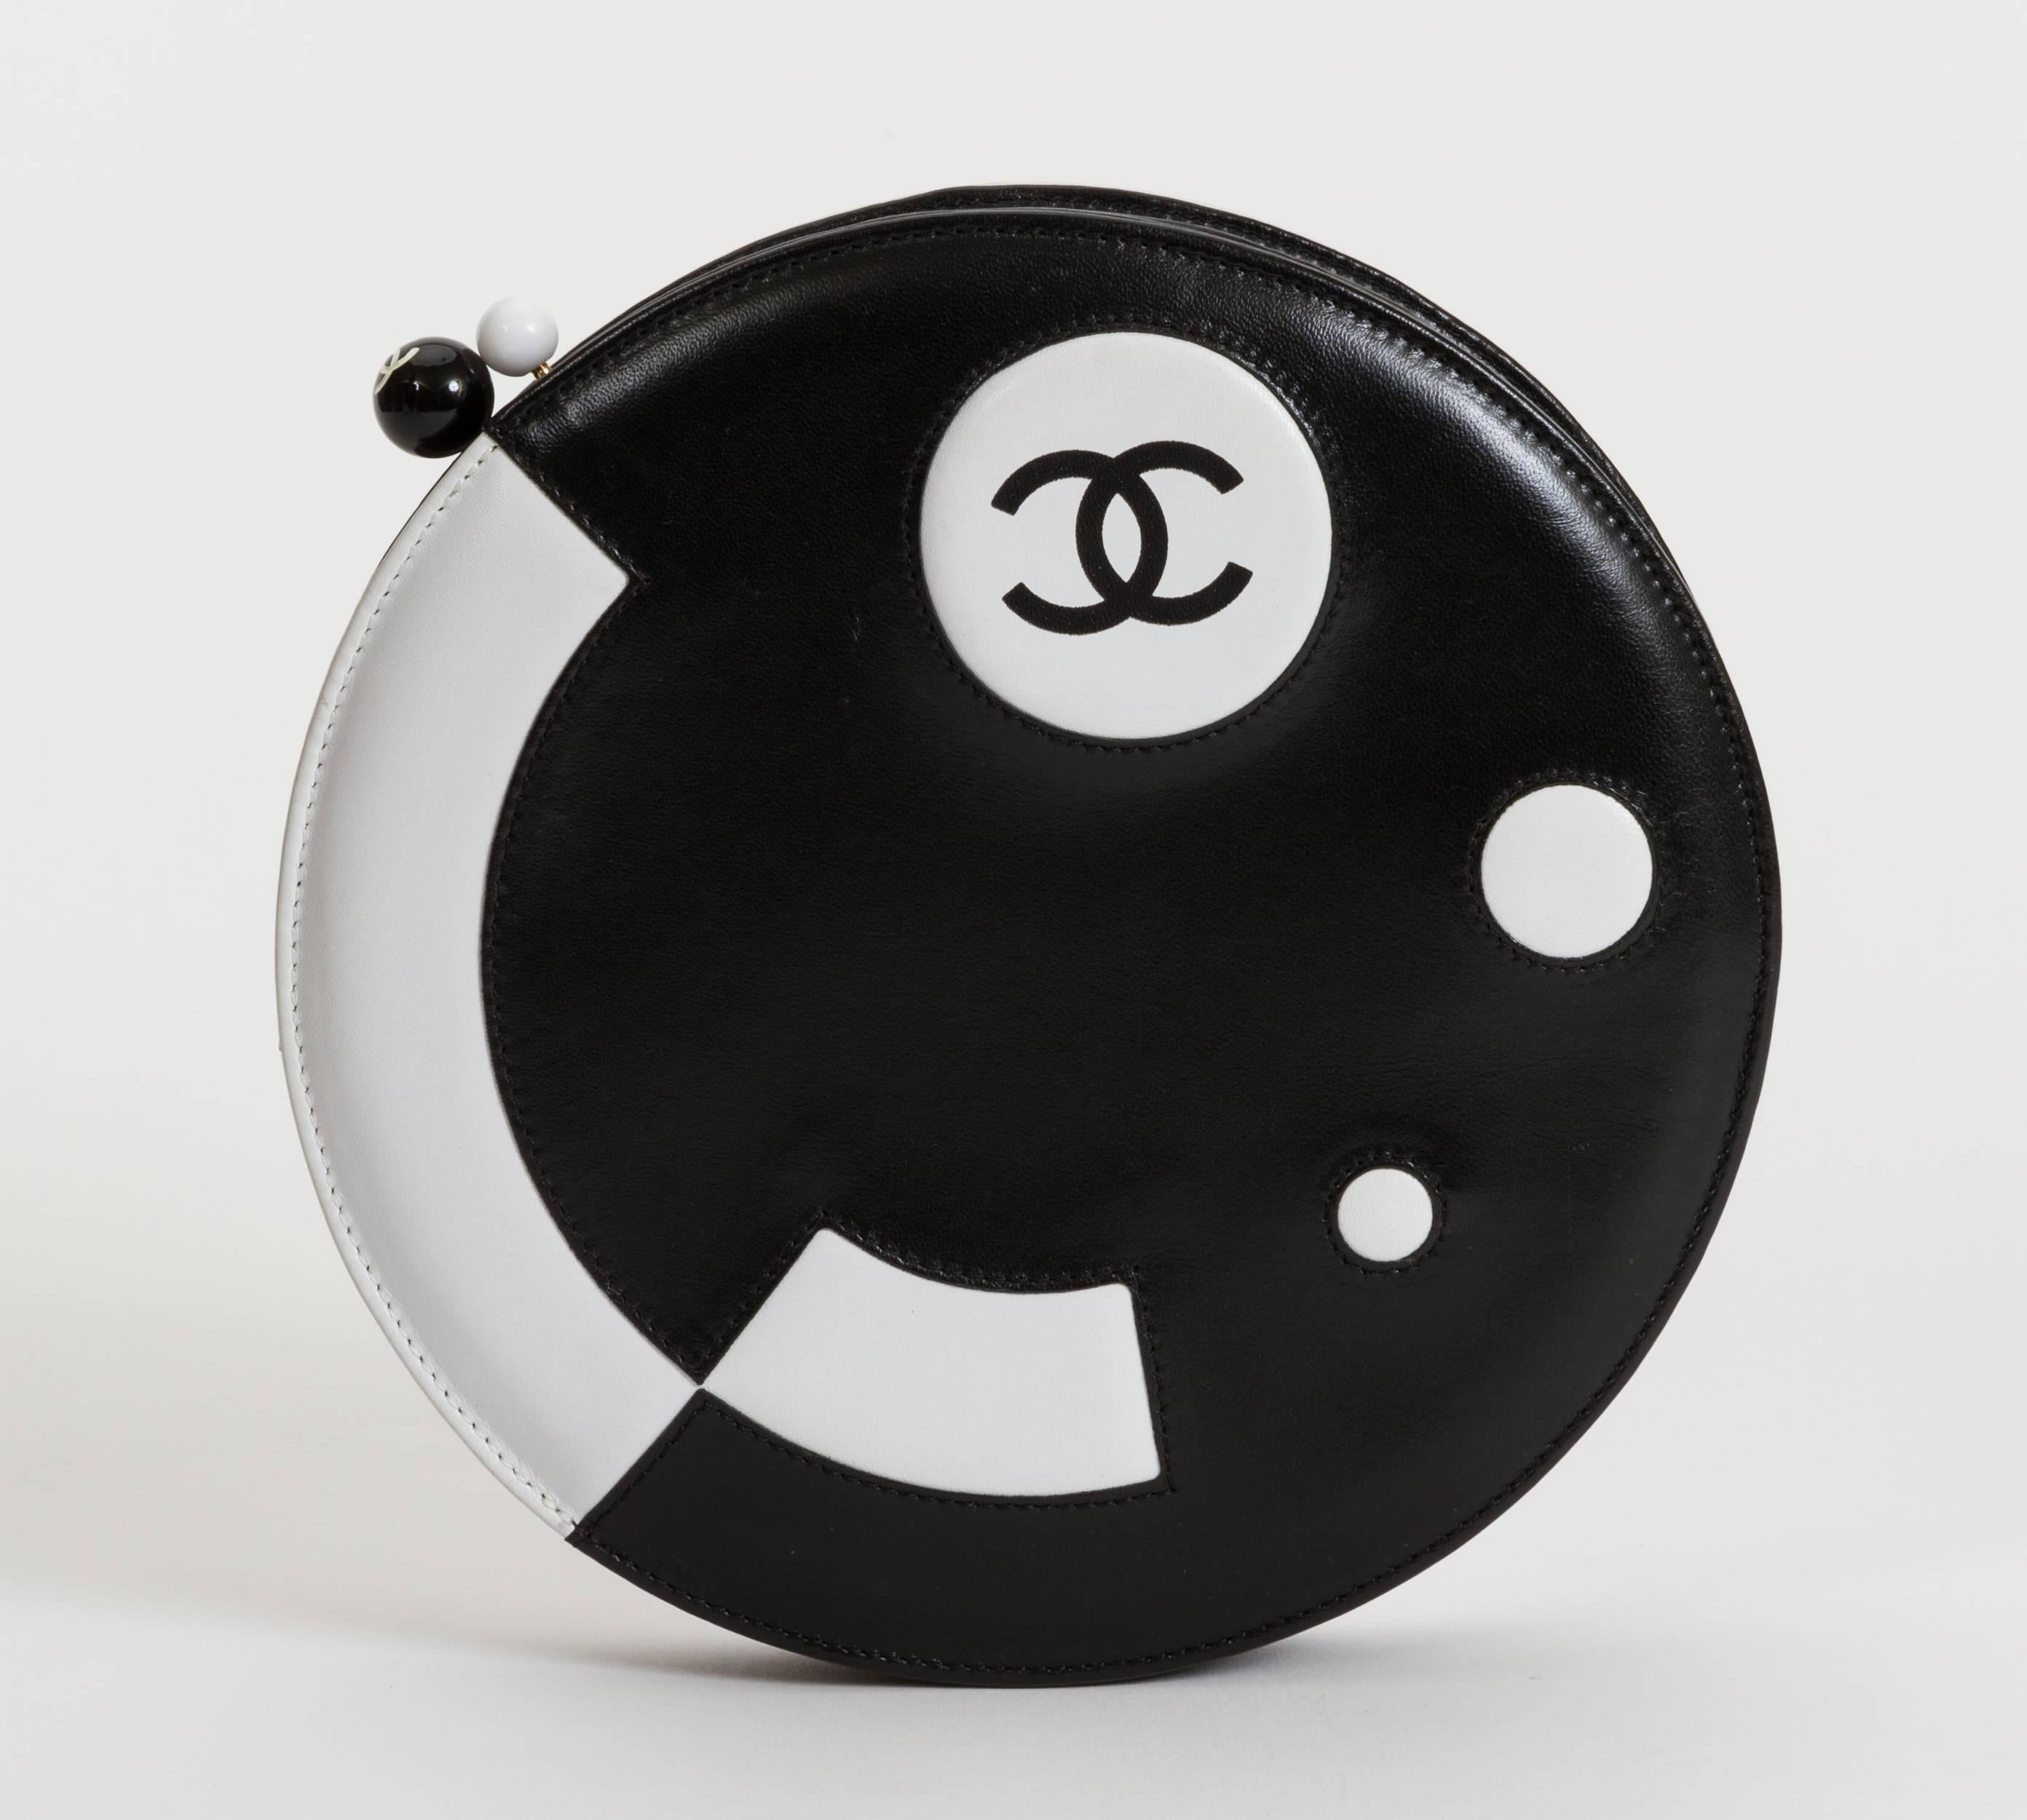 Chanel black and white rare round disc evening bag. Lucite kiss lock clasp. Collection 2002. Shoulder drop 13". Can be worn as a clutch or as a shoulder bag. Comes with hologram, id card, booklet, dust cover.